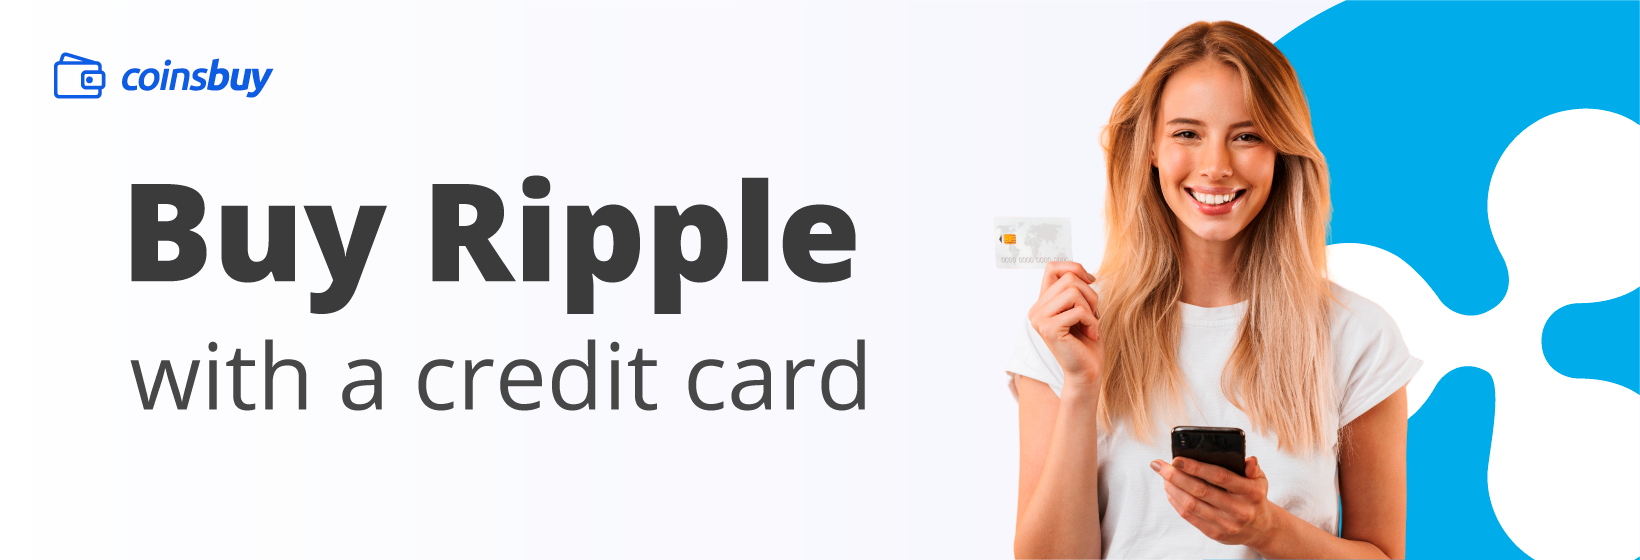 Buy Ripple with a credit card